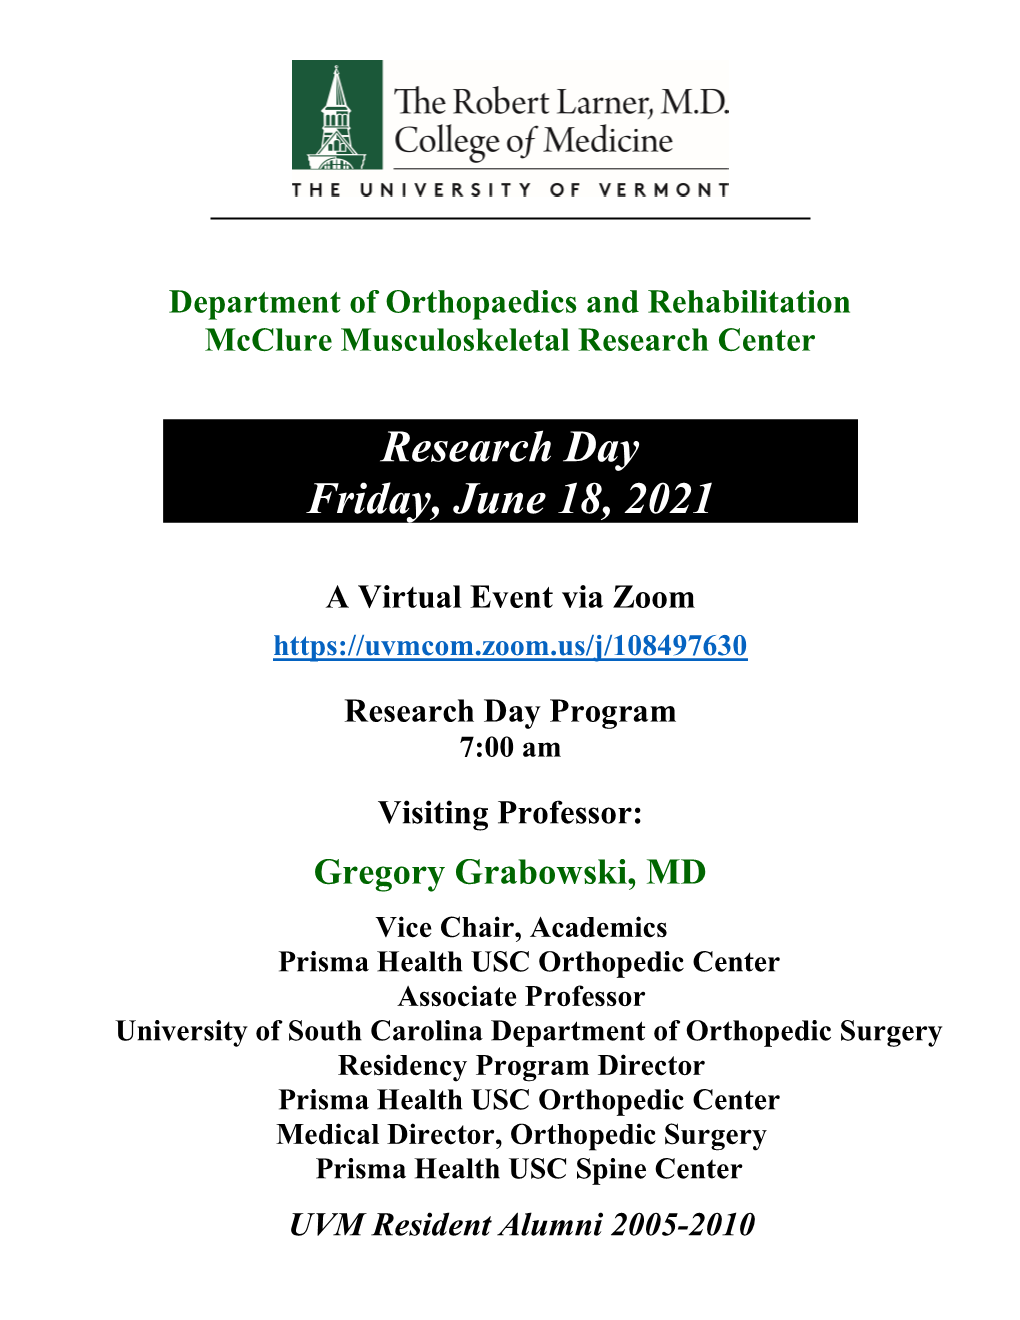 Research Day Friday, June 18, 2021